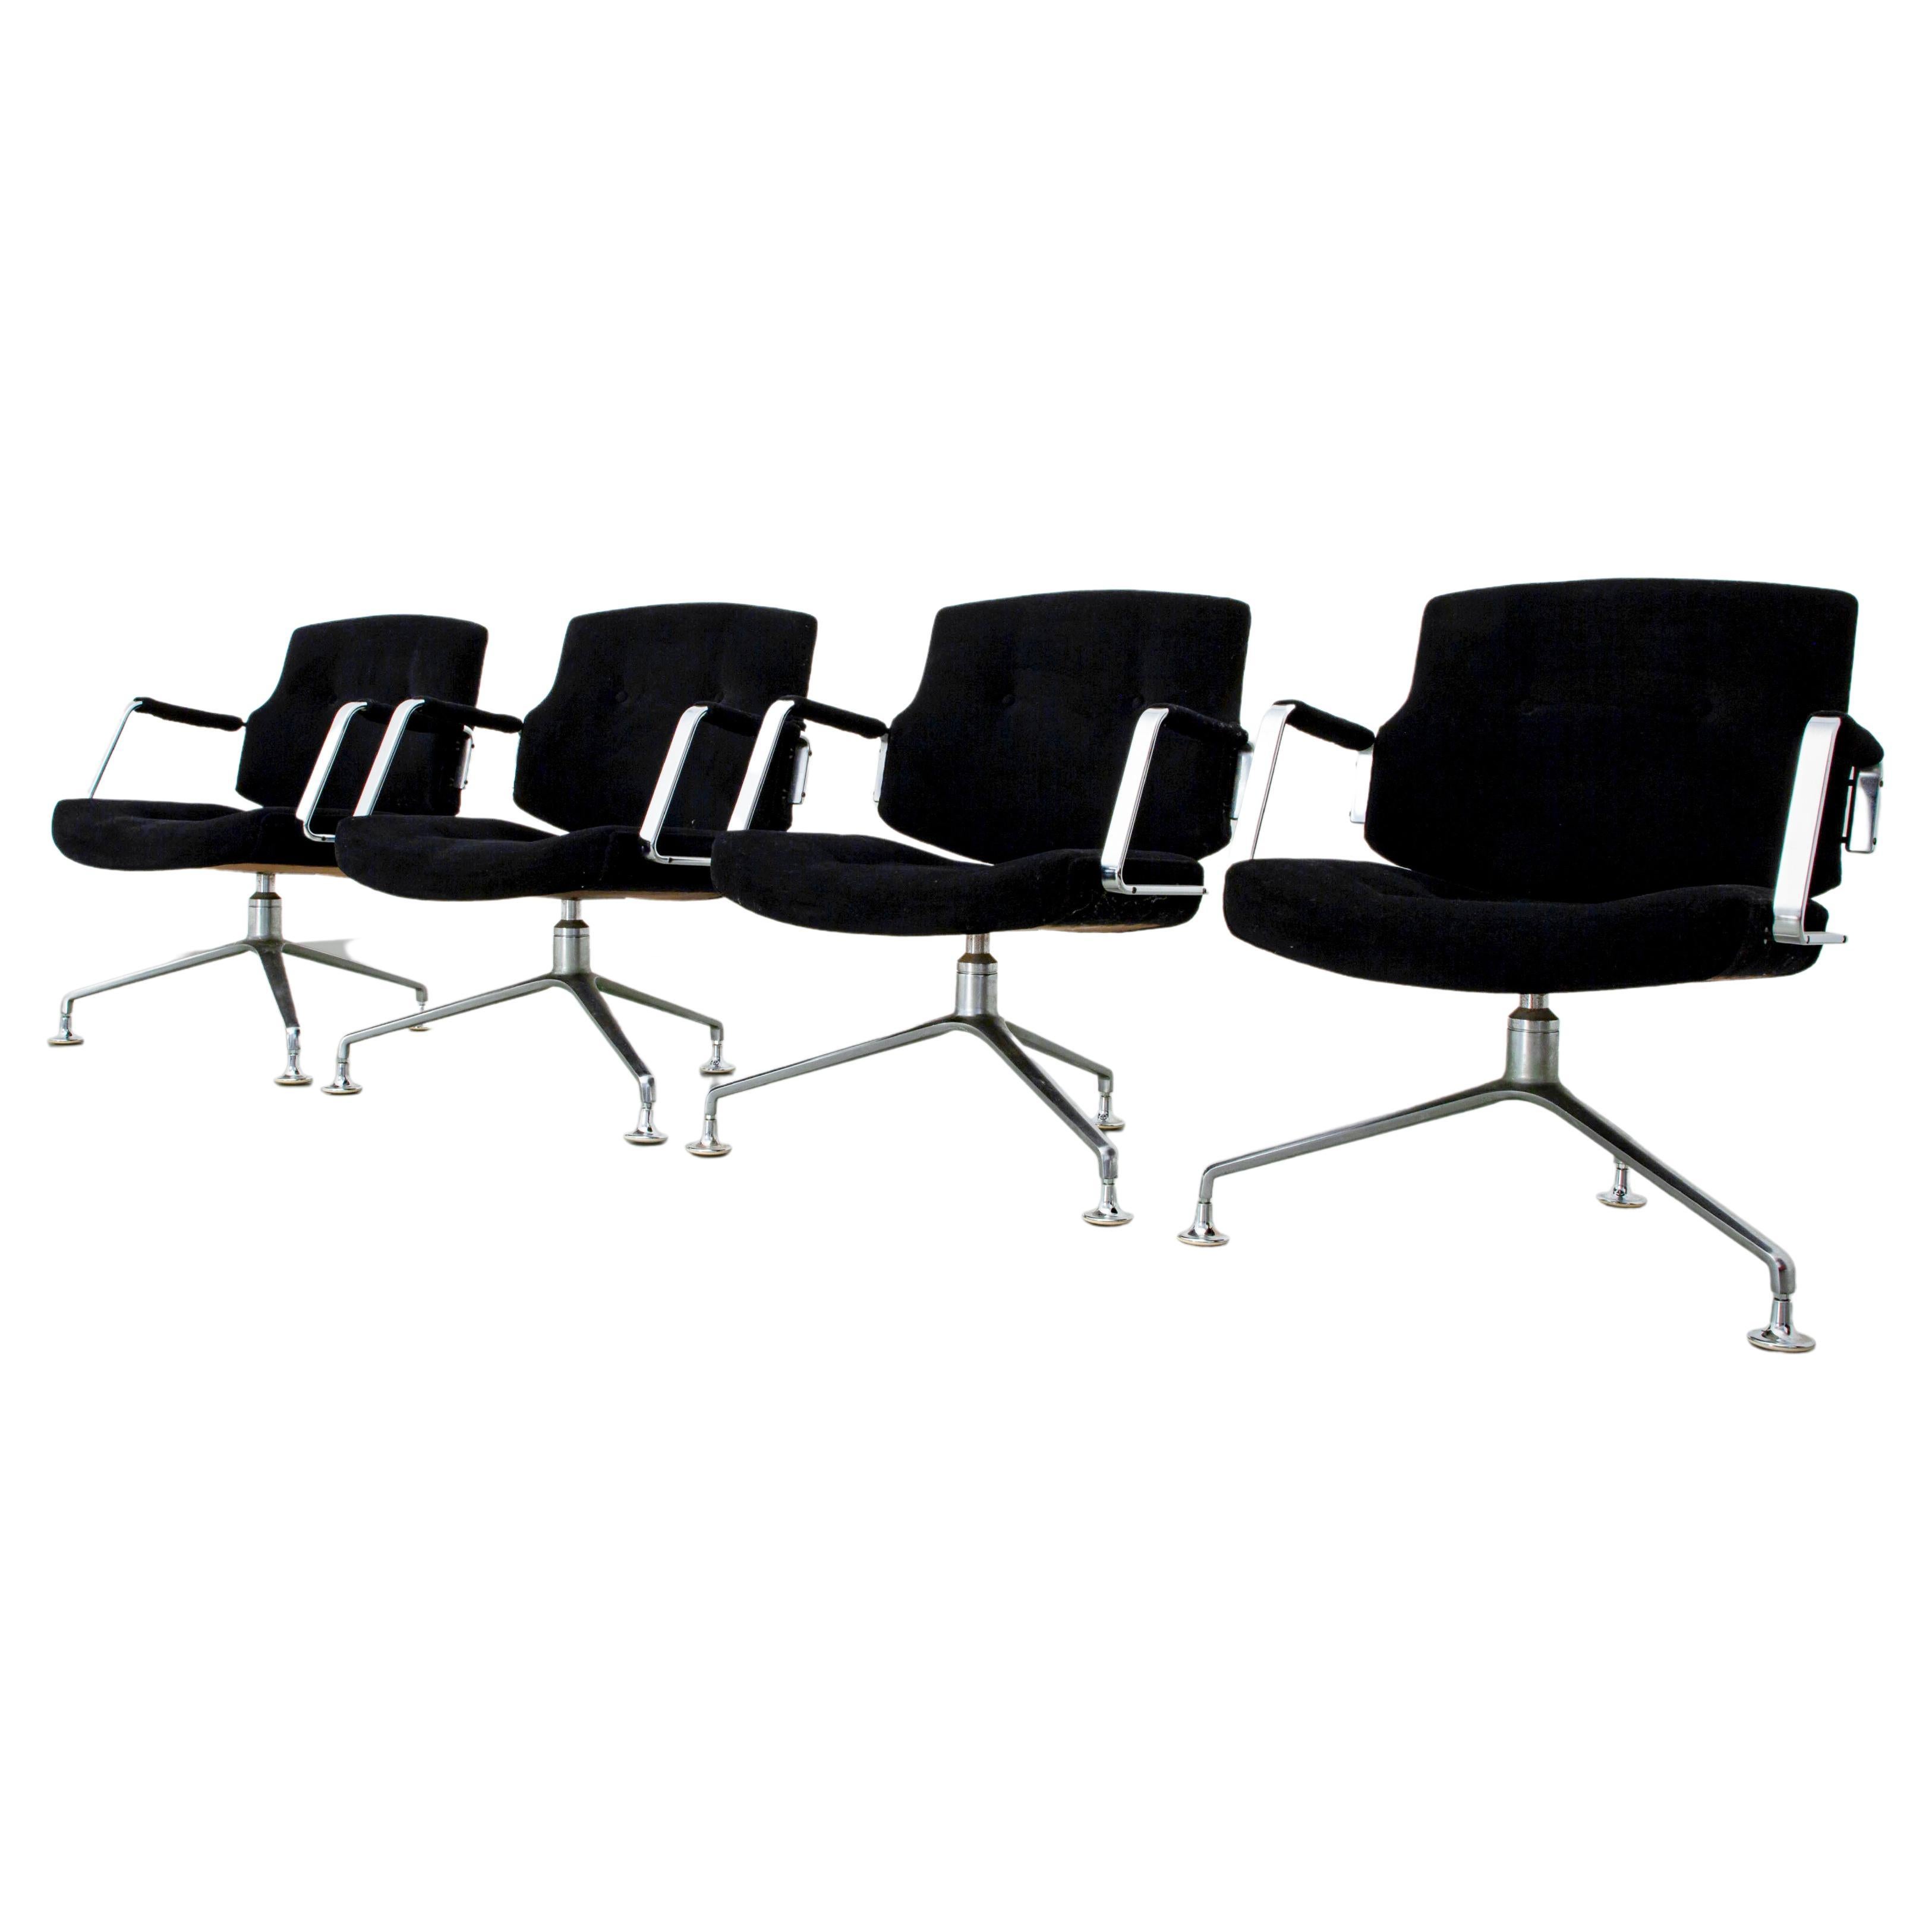 Set of 4 FK 84 Armchairs by Fabricius and Kastholm for Kill Int., Denmark, 1962